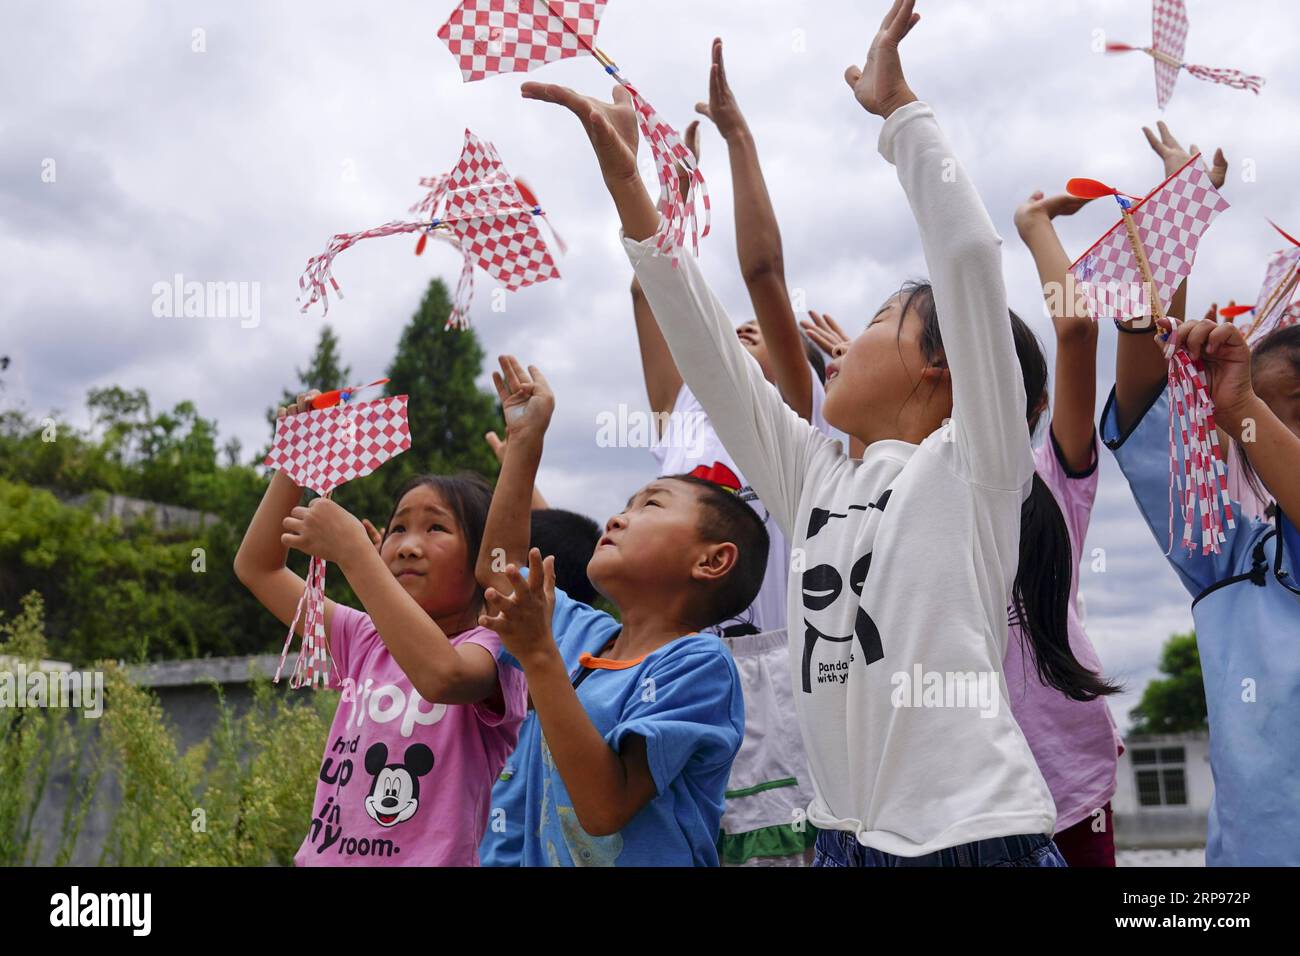 (190327) -- BEIJING, March 27, 2019 (Xinhua) -- Students conduct a test flight of aviation models at the primary school of Daba Village in Pengshui County, southwest China s Chongqing Municipality, Aug. 18, 2017. China s efforts to promote the balanced development of compulsory education, which usually means narrowing inter-regional, rural-urban or inter-school gaps in terms of education conditions and quality, has borne fruit, the Ministry of Education said Tuesday. According to the ministry, the balanced development of compulsory education has been achieved in 2,717 counties, representing 92 Stock Photo